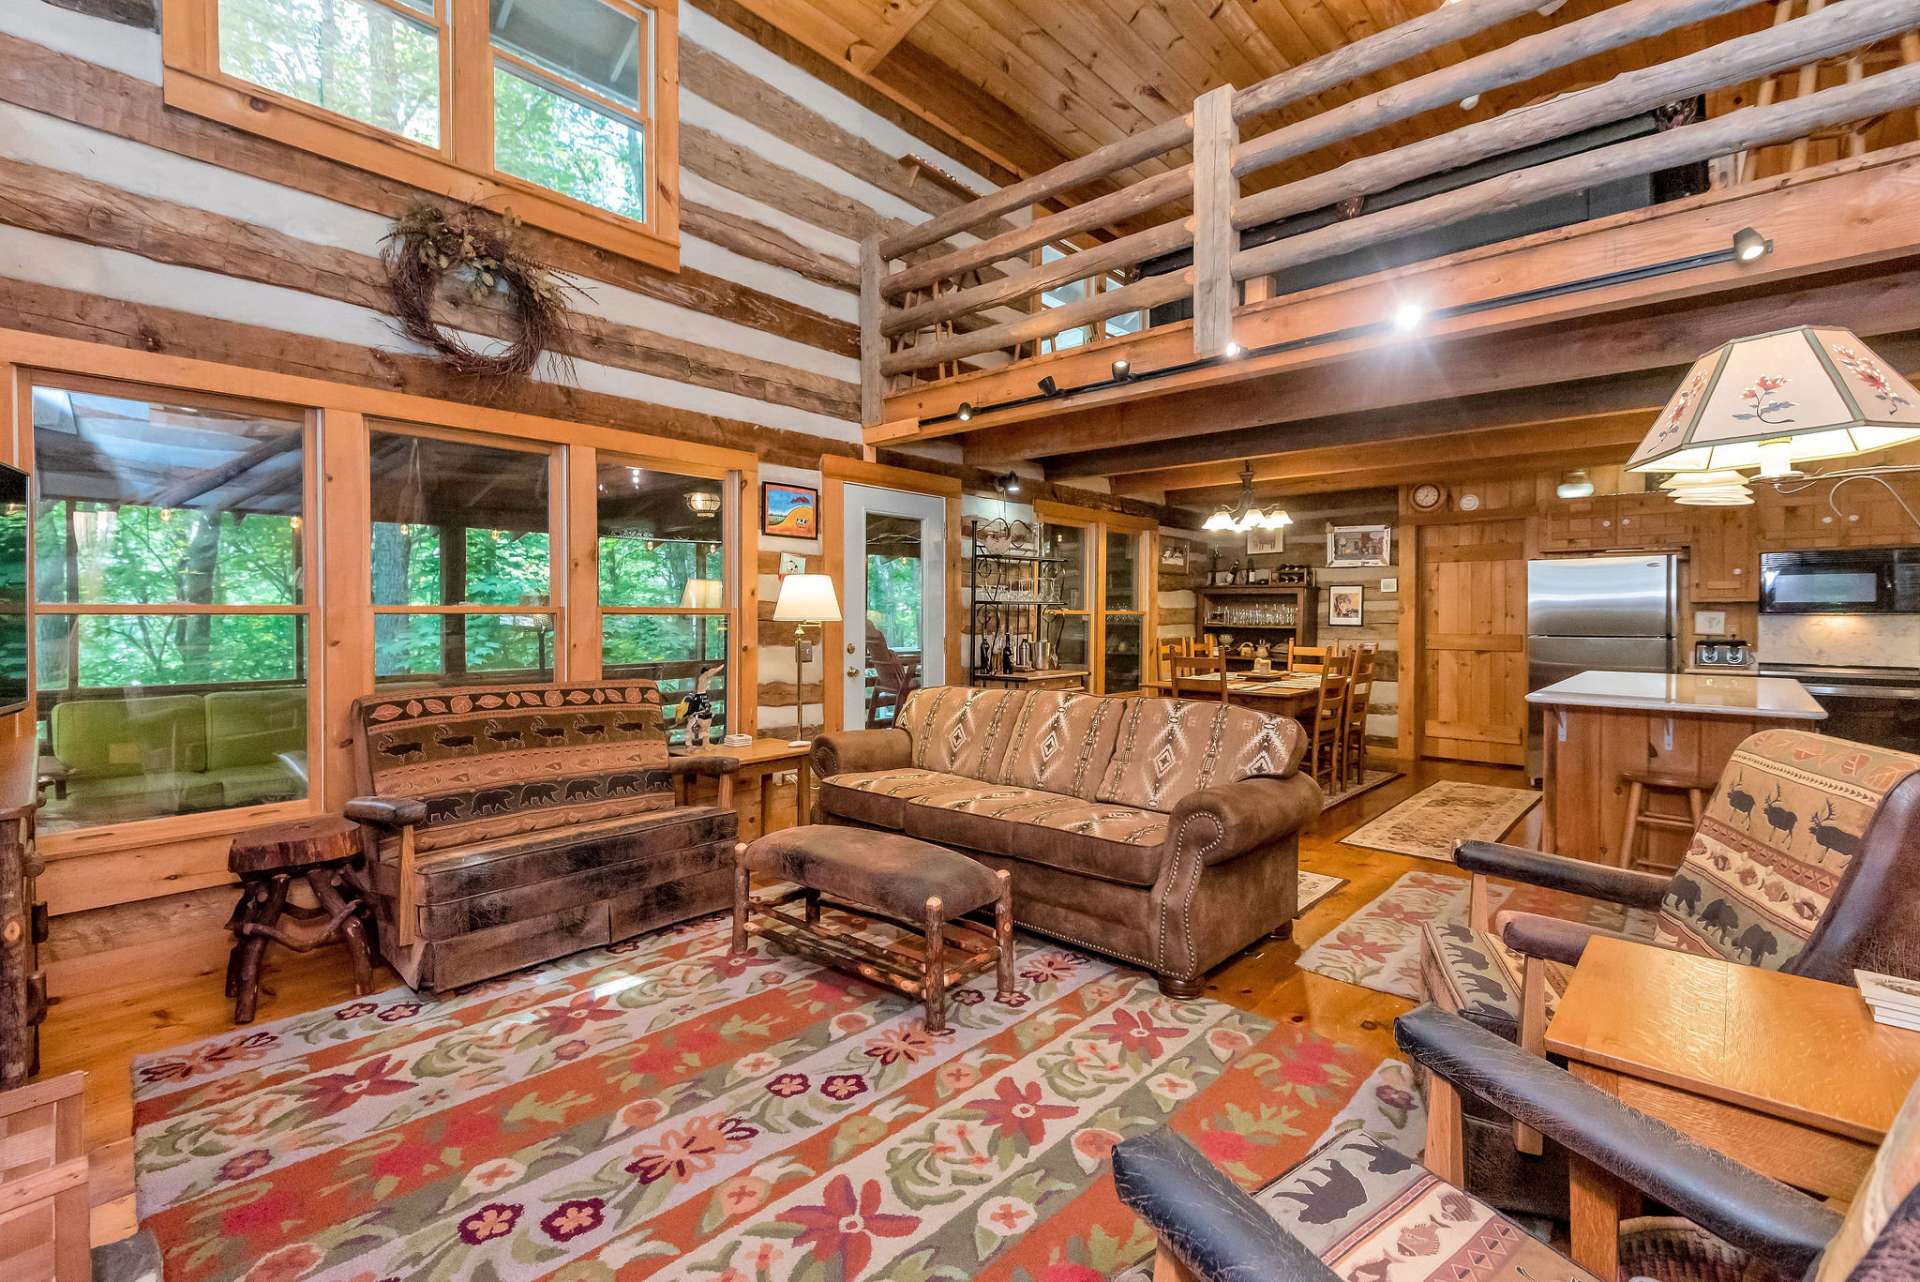 This Stonebridge cabin allows for comfortable living with the large areas and rooms, yet doesn't sacrifice the intimate allure of being together in the mountains.